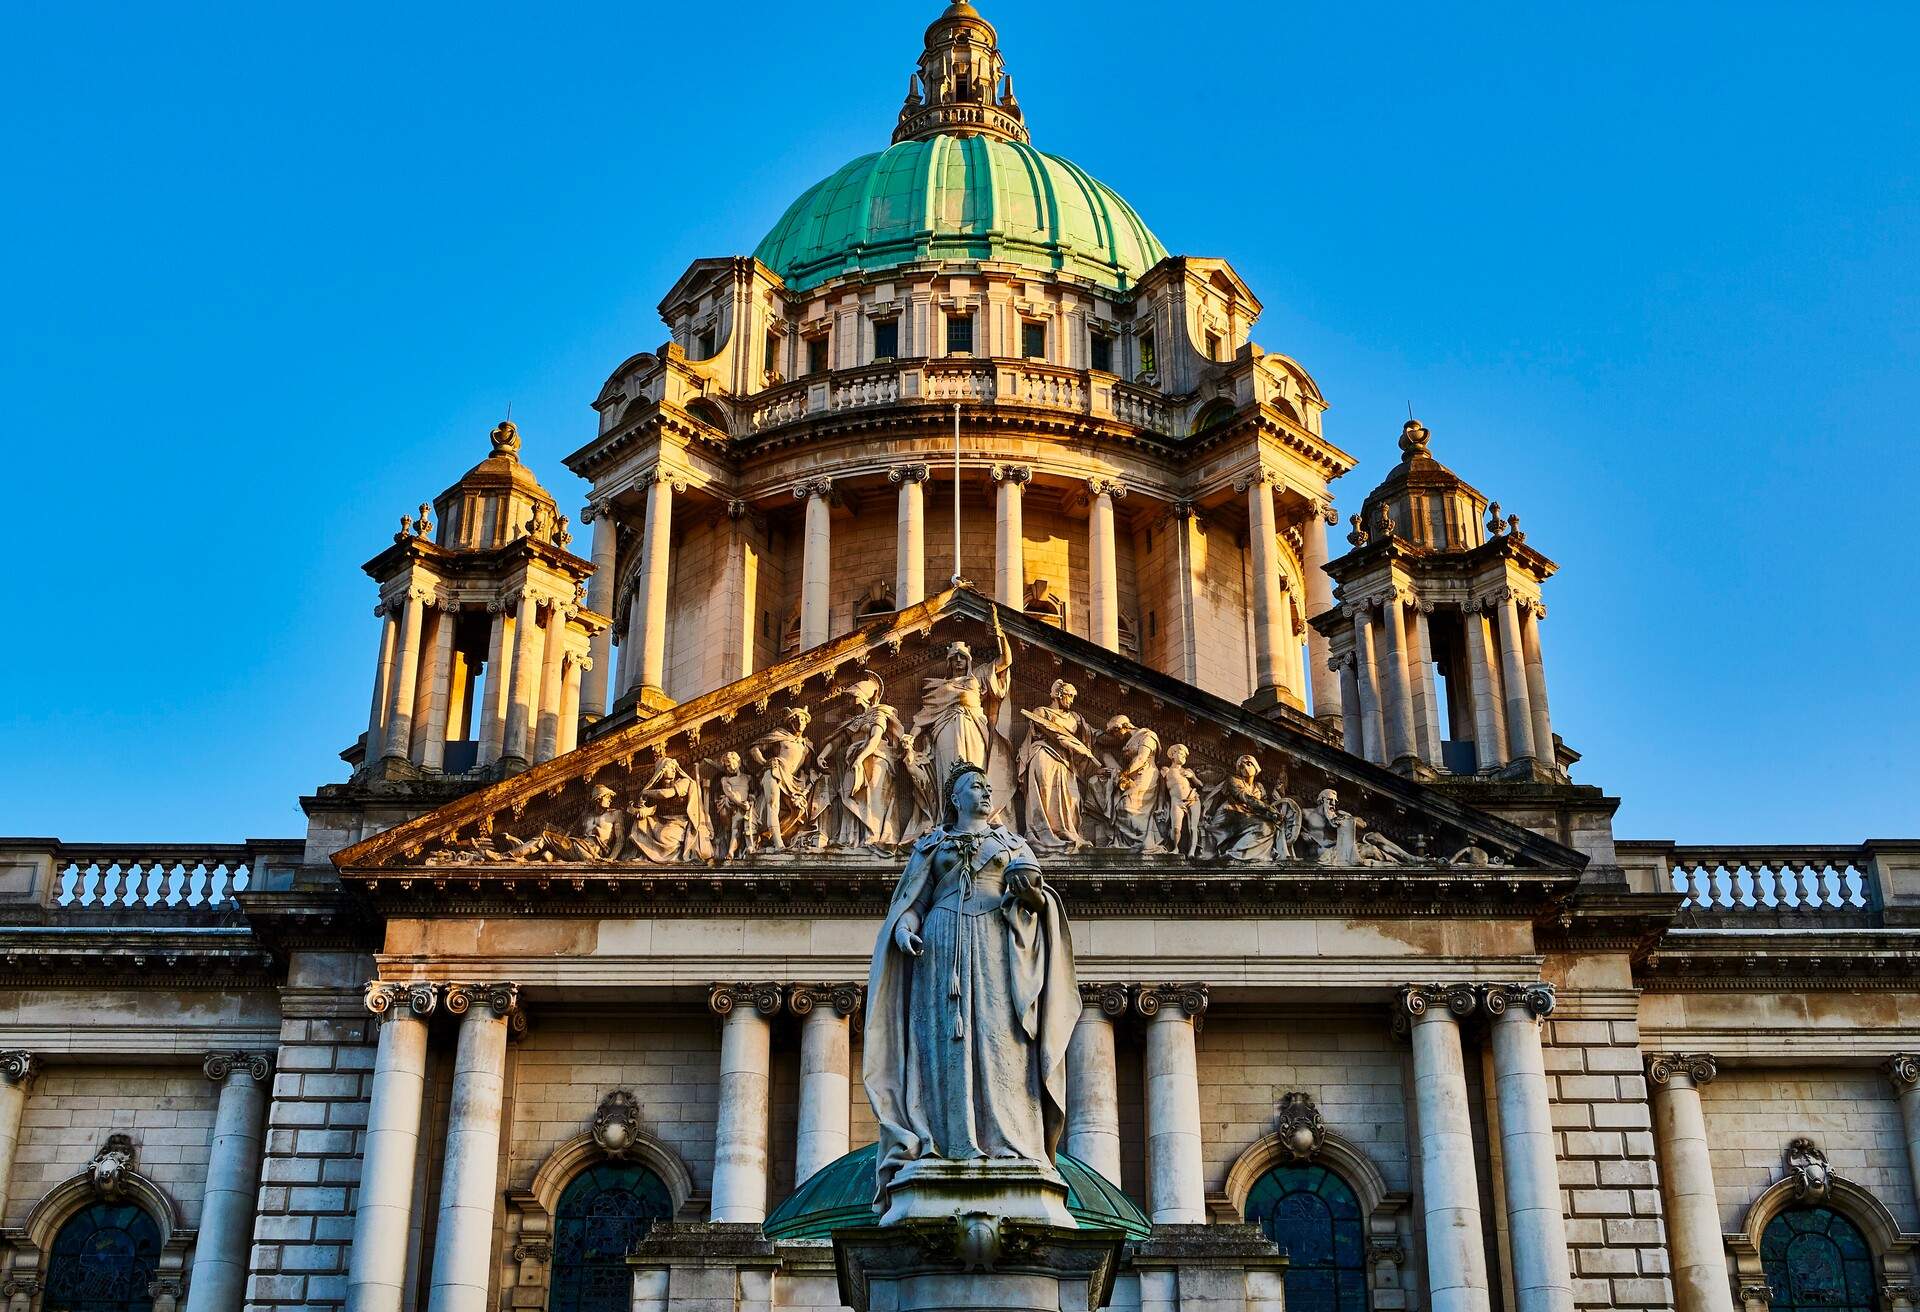 An elegant Baroque Revival civic building adorned with large columns, pediments, statues, sculptures and towers topped with domes.